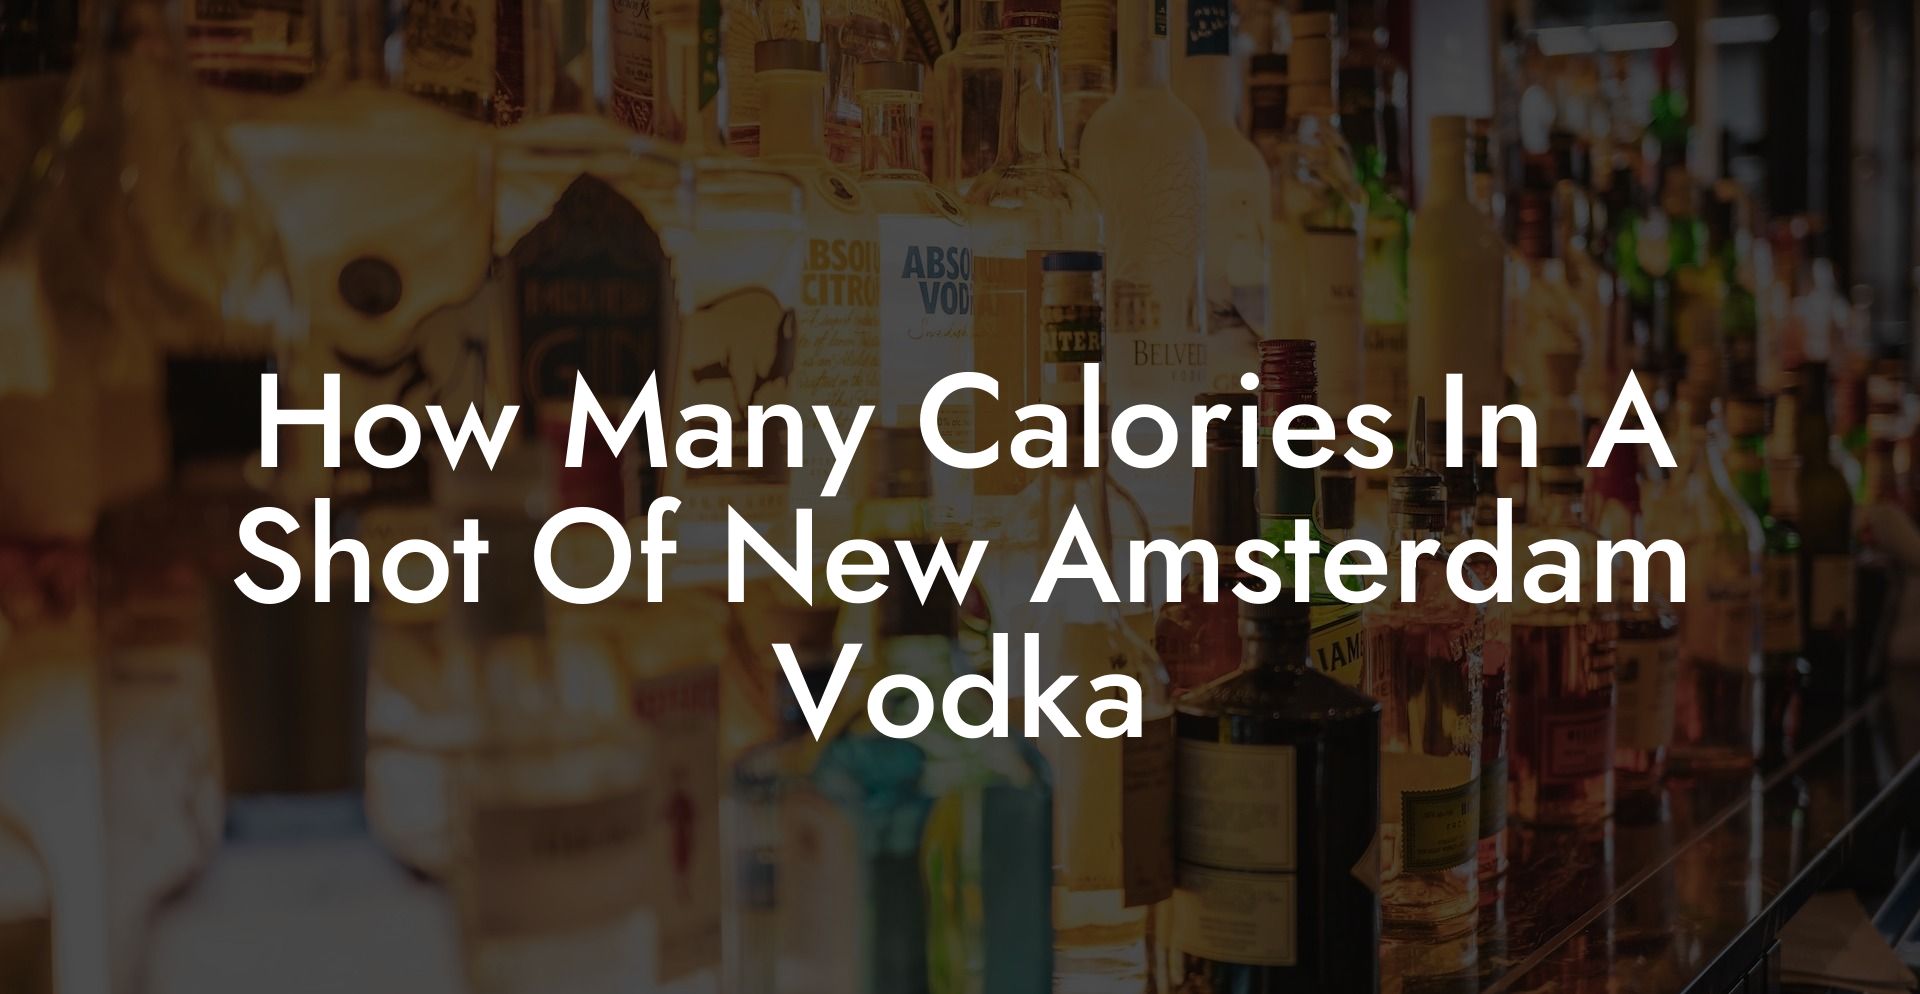 How Many Calories In A Shot Of New Amsterdam Vodka